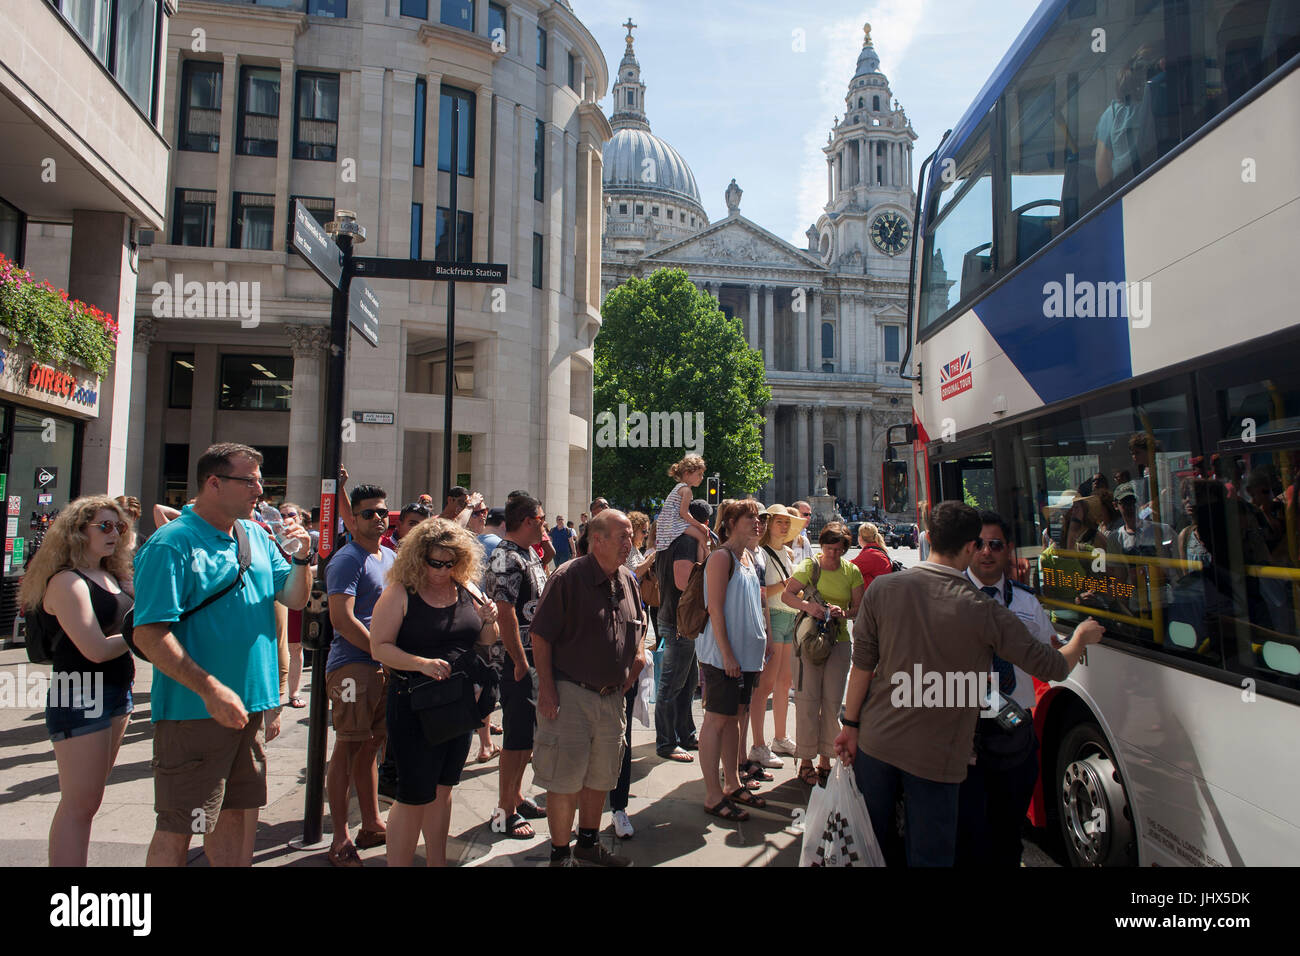 A tour bus with The Original Tour latest branding of a Union jack flag picks up passengers with St. Paul's Cathedral beyond, on Ludgate Hill, on 7th July 2017, in central London. Stock Photo